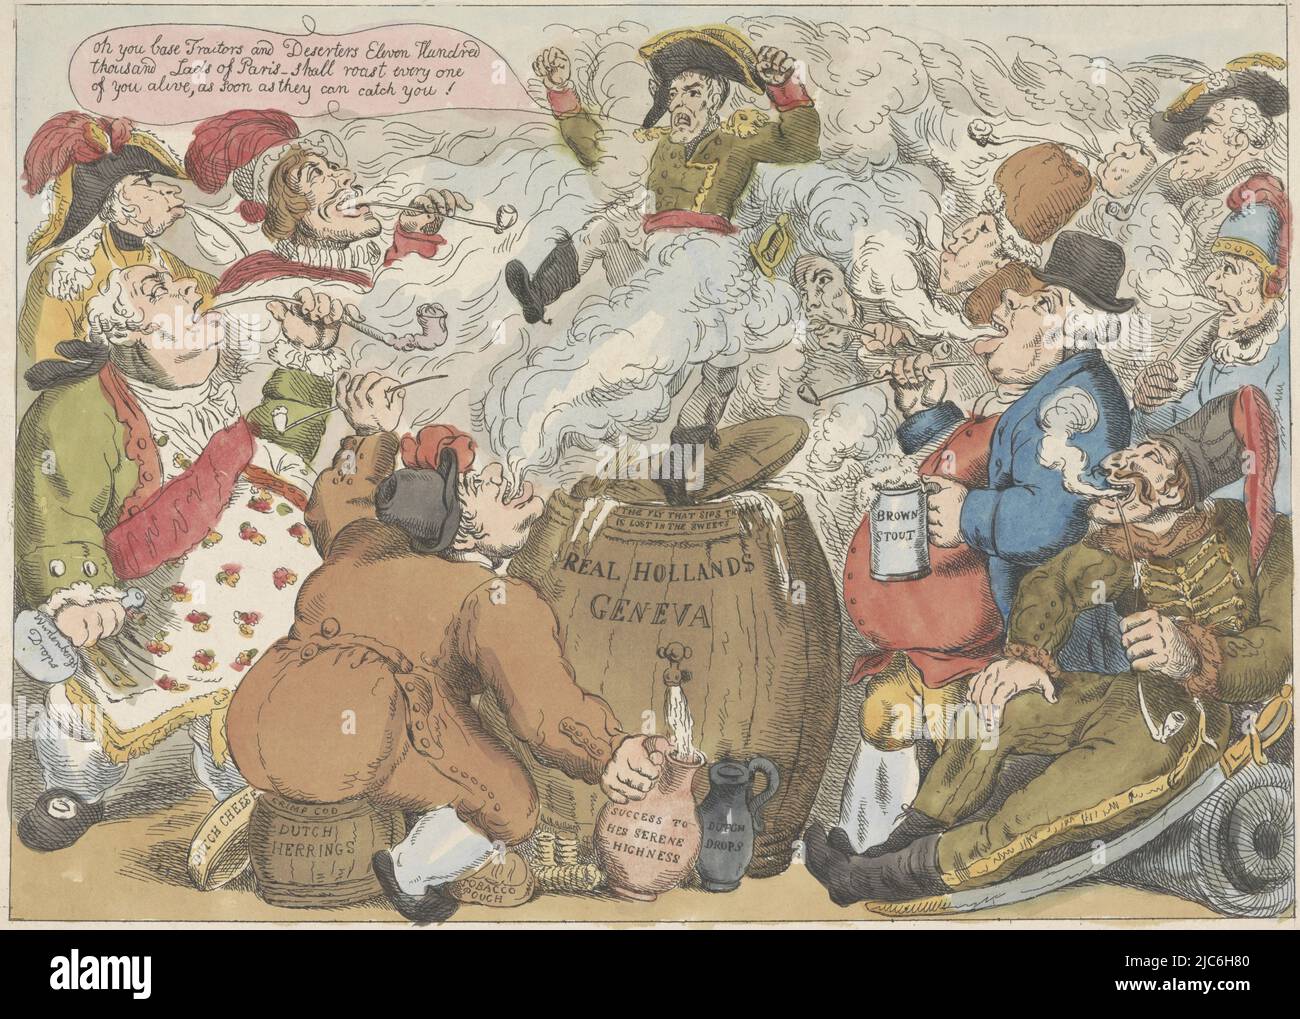 Cartoon of Napoleon after his loss at the battle of Leipzig, 1813. A small  figure of Napoleon is stamping angrily on top of a large wooden barrel of  Dutch gin causing the